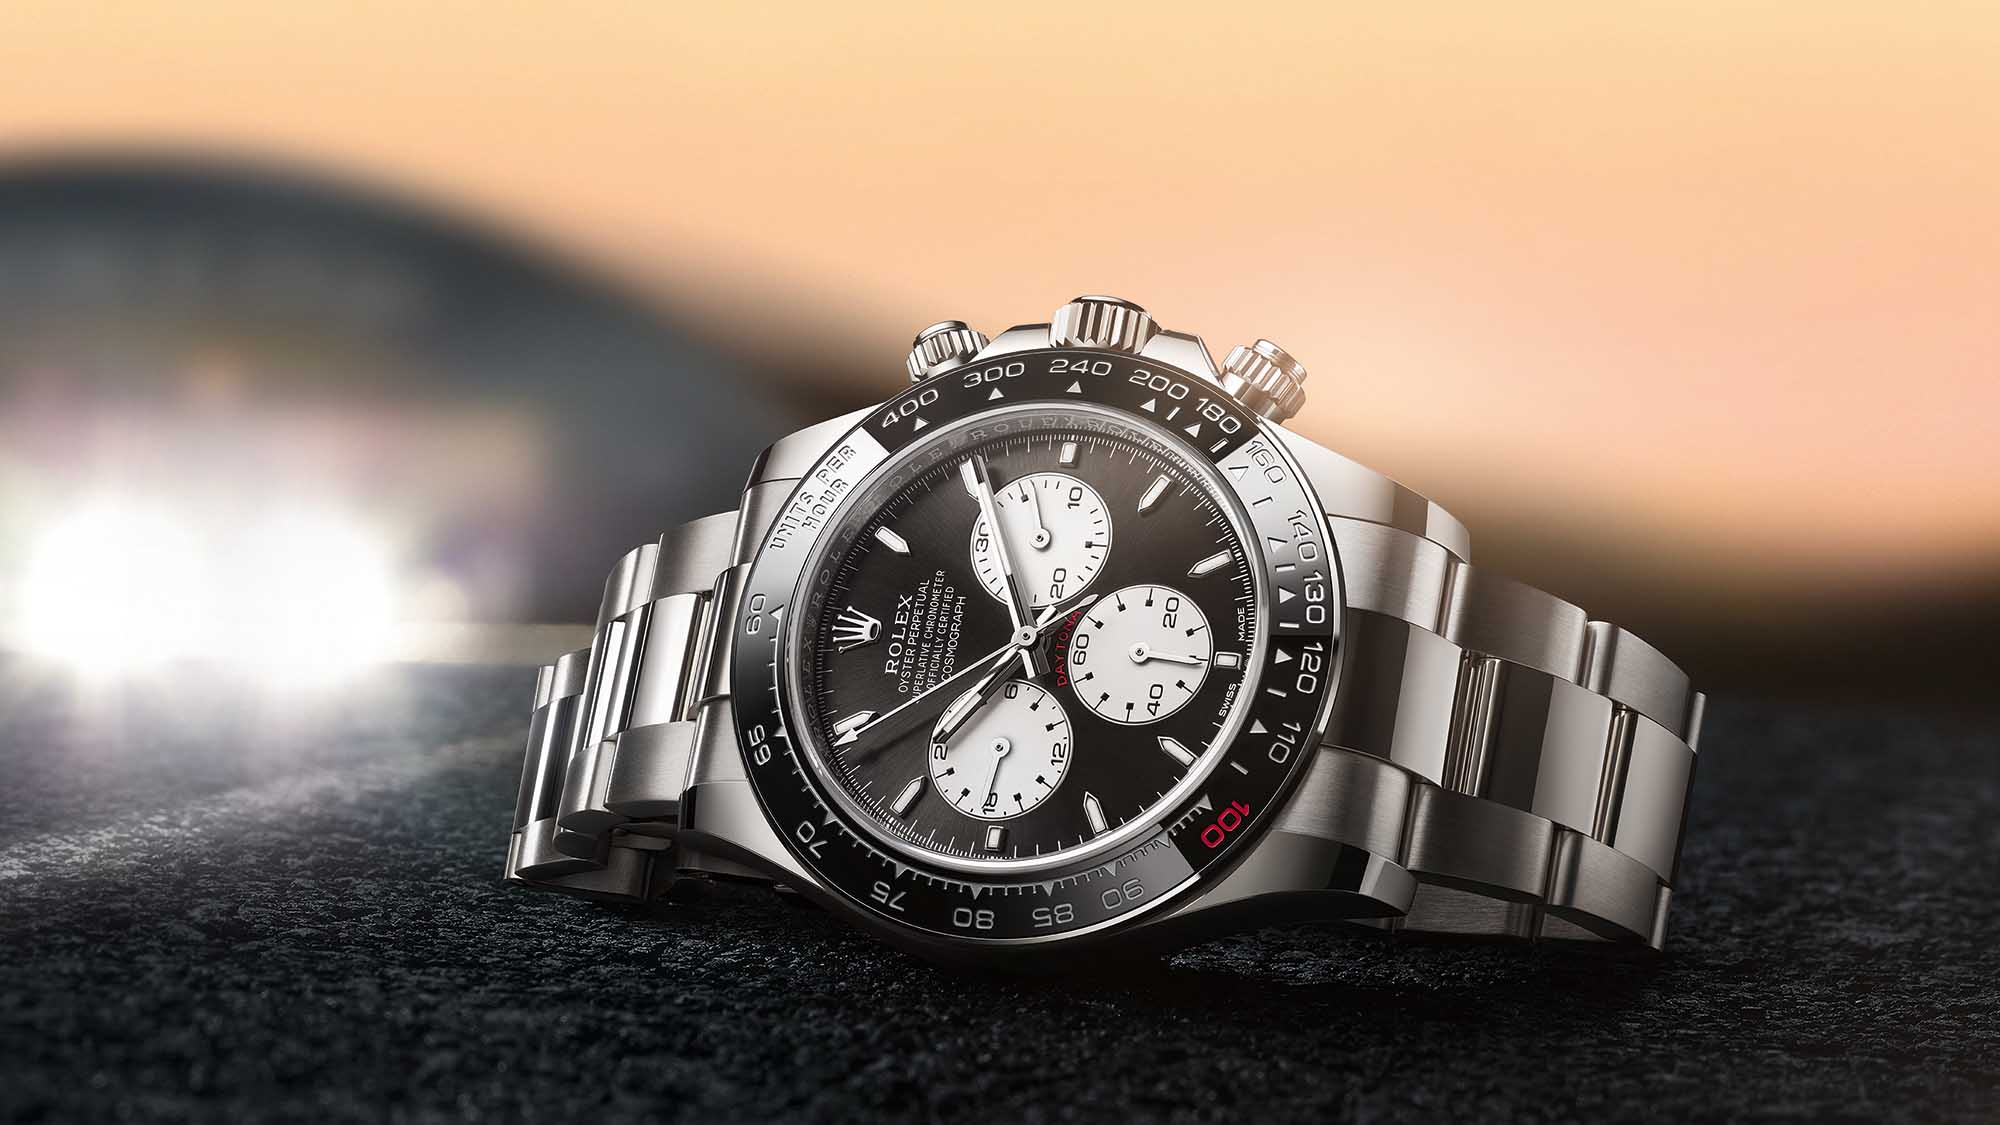 foretrækkes Gå rundt Bil First Look: Rolex Revives The 'Paul Newman' With A New Le Mans-Inspired  Cosmograph Daytona Ref. 126529LN Watch | aBlogtoWatch